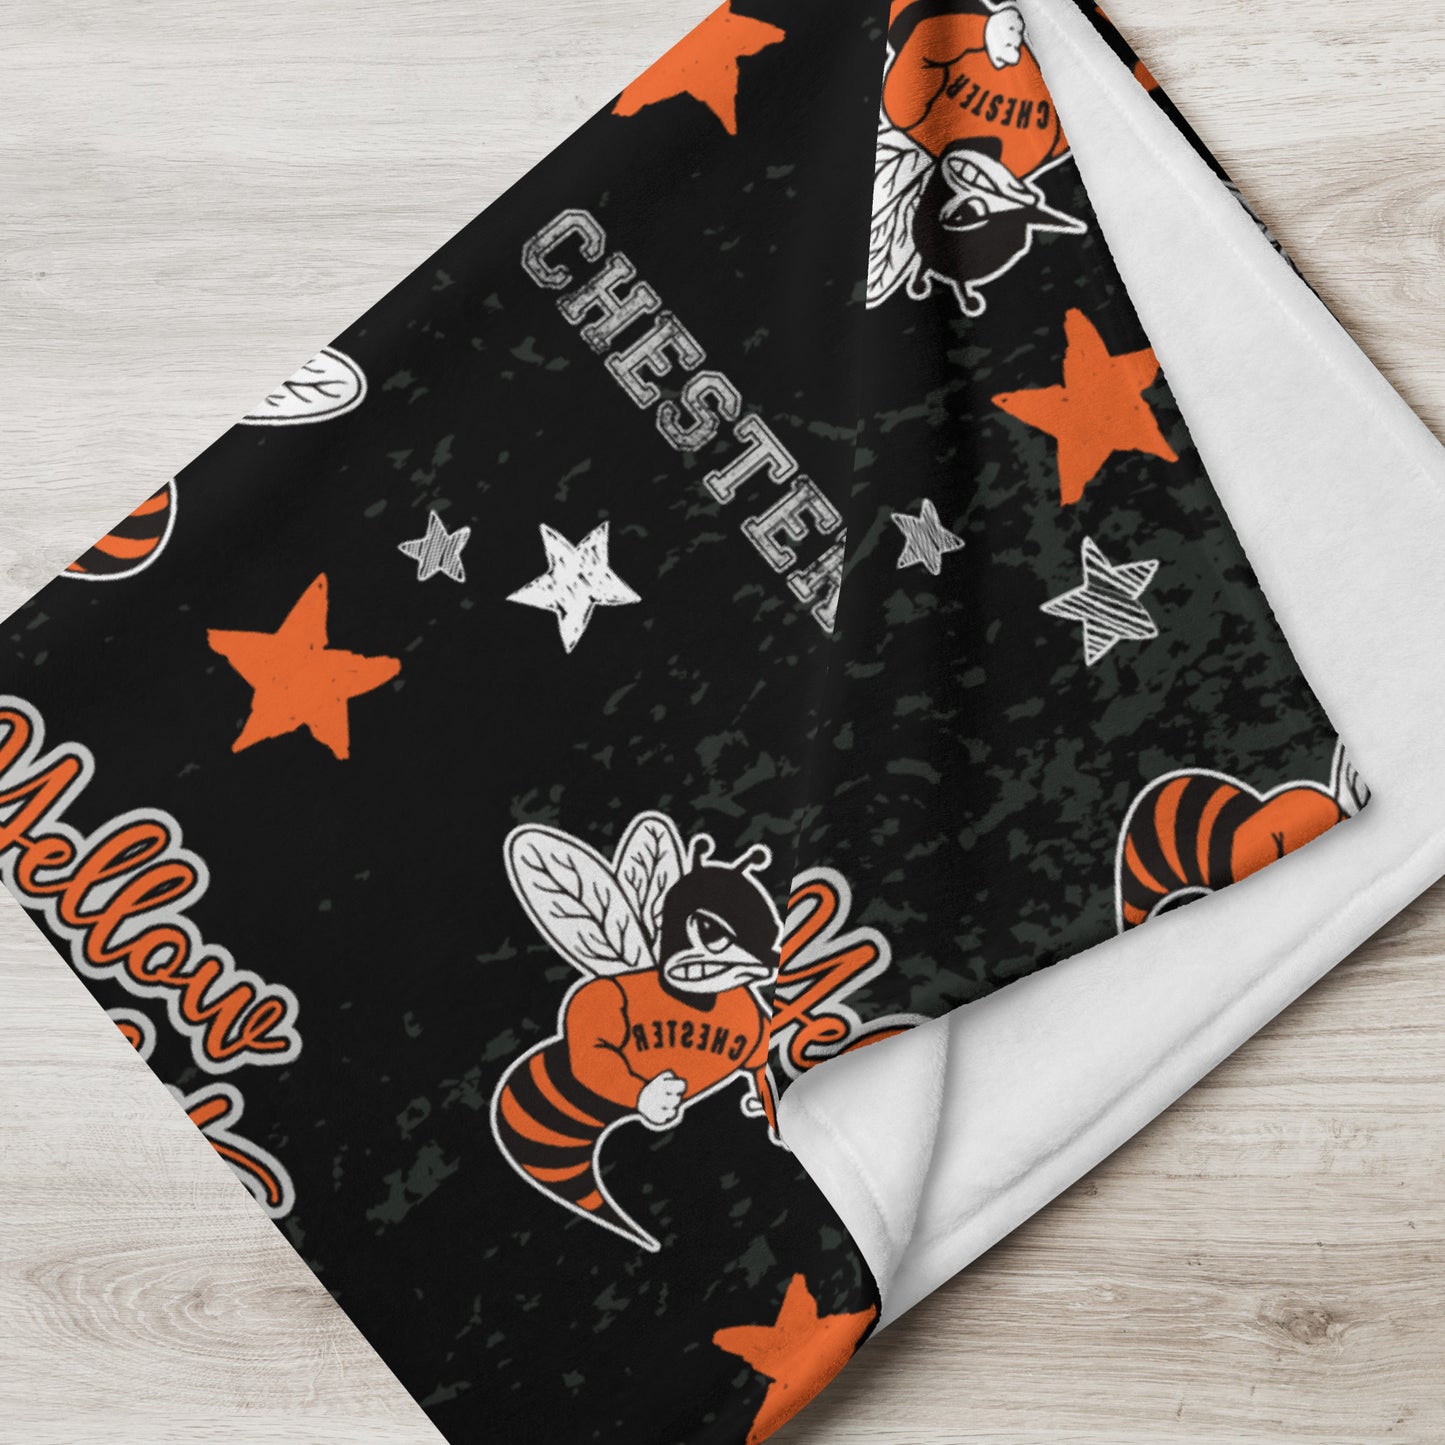 Chester Yellow Jackets Throw Blanket